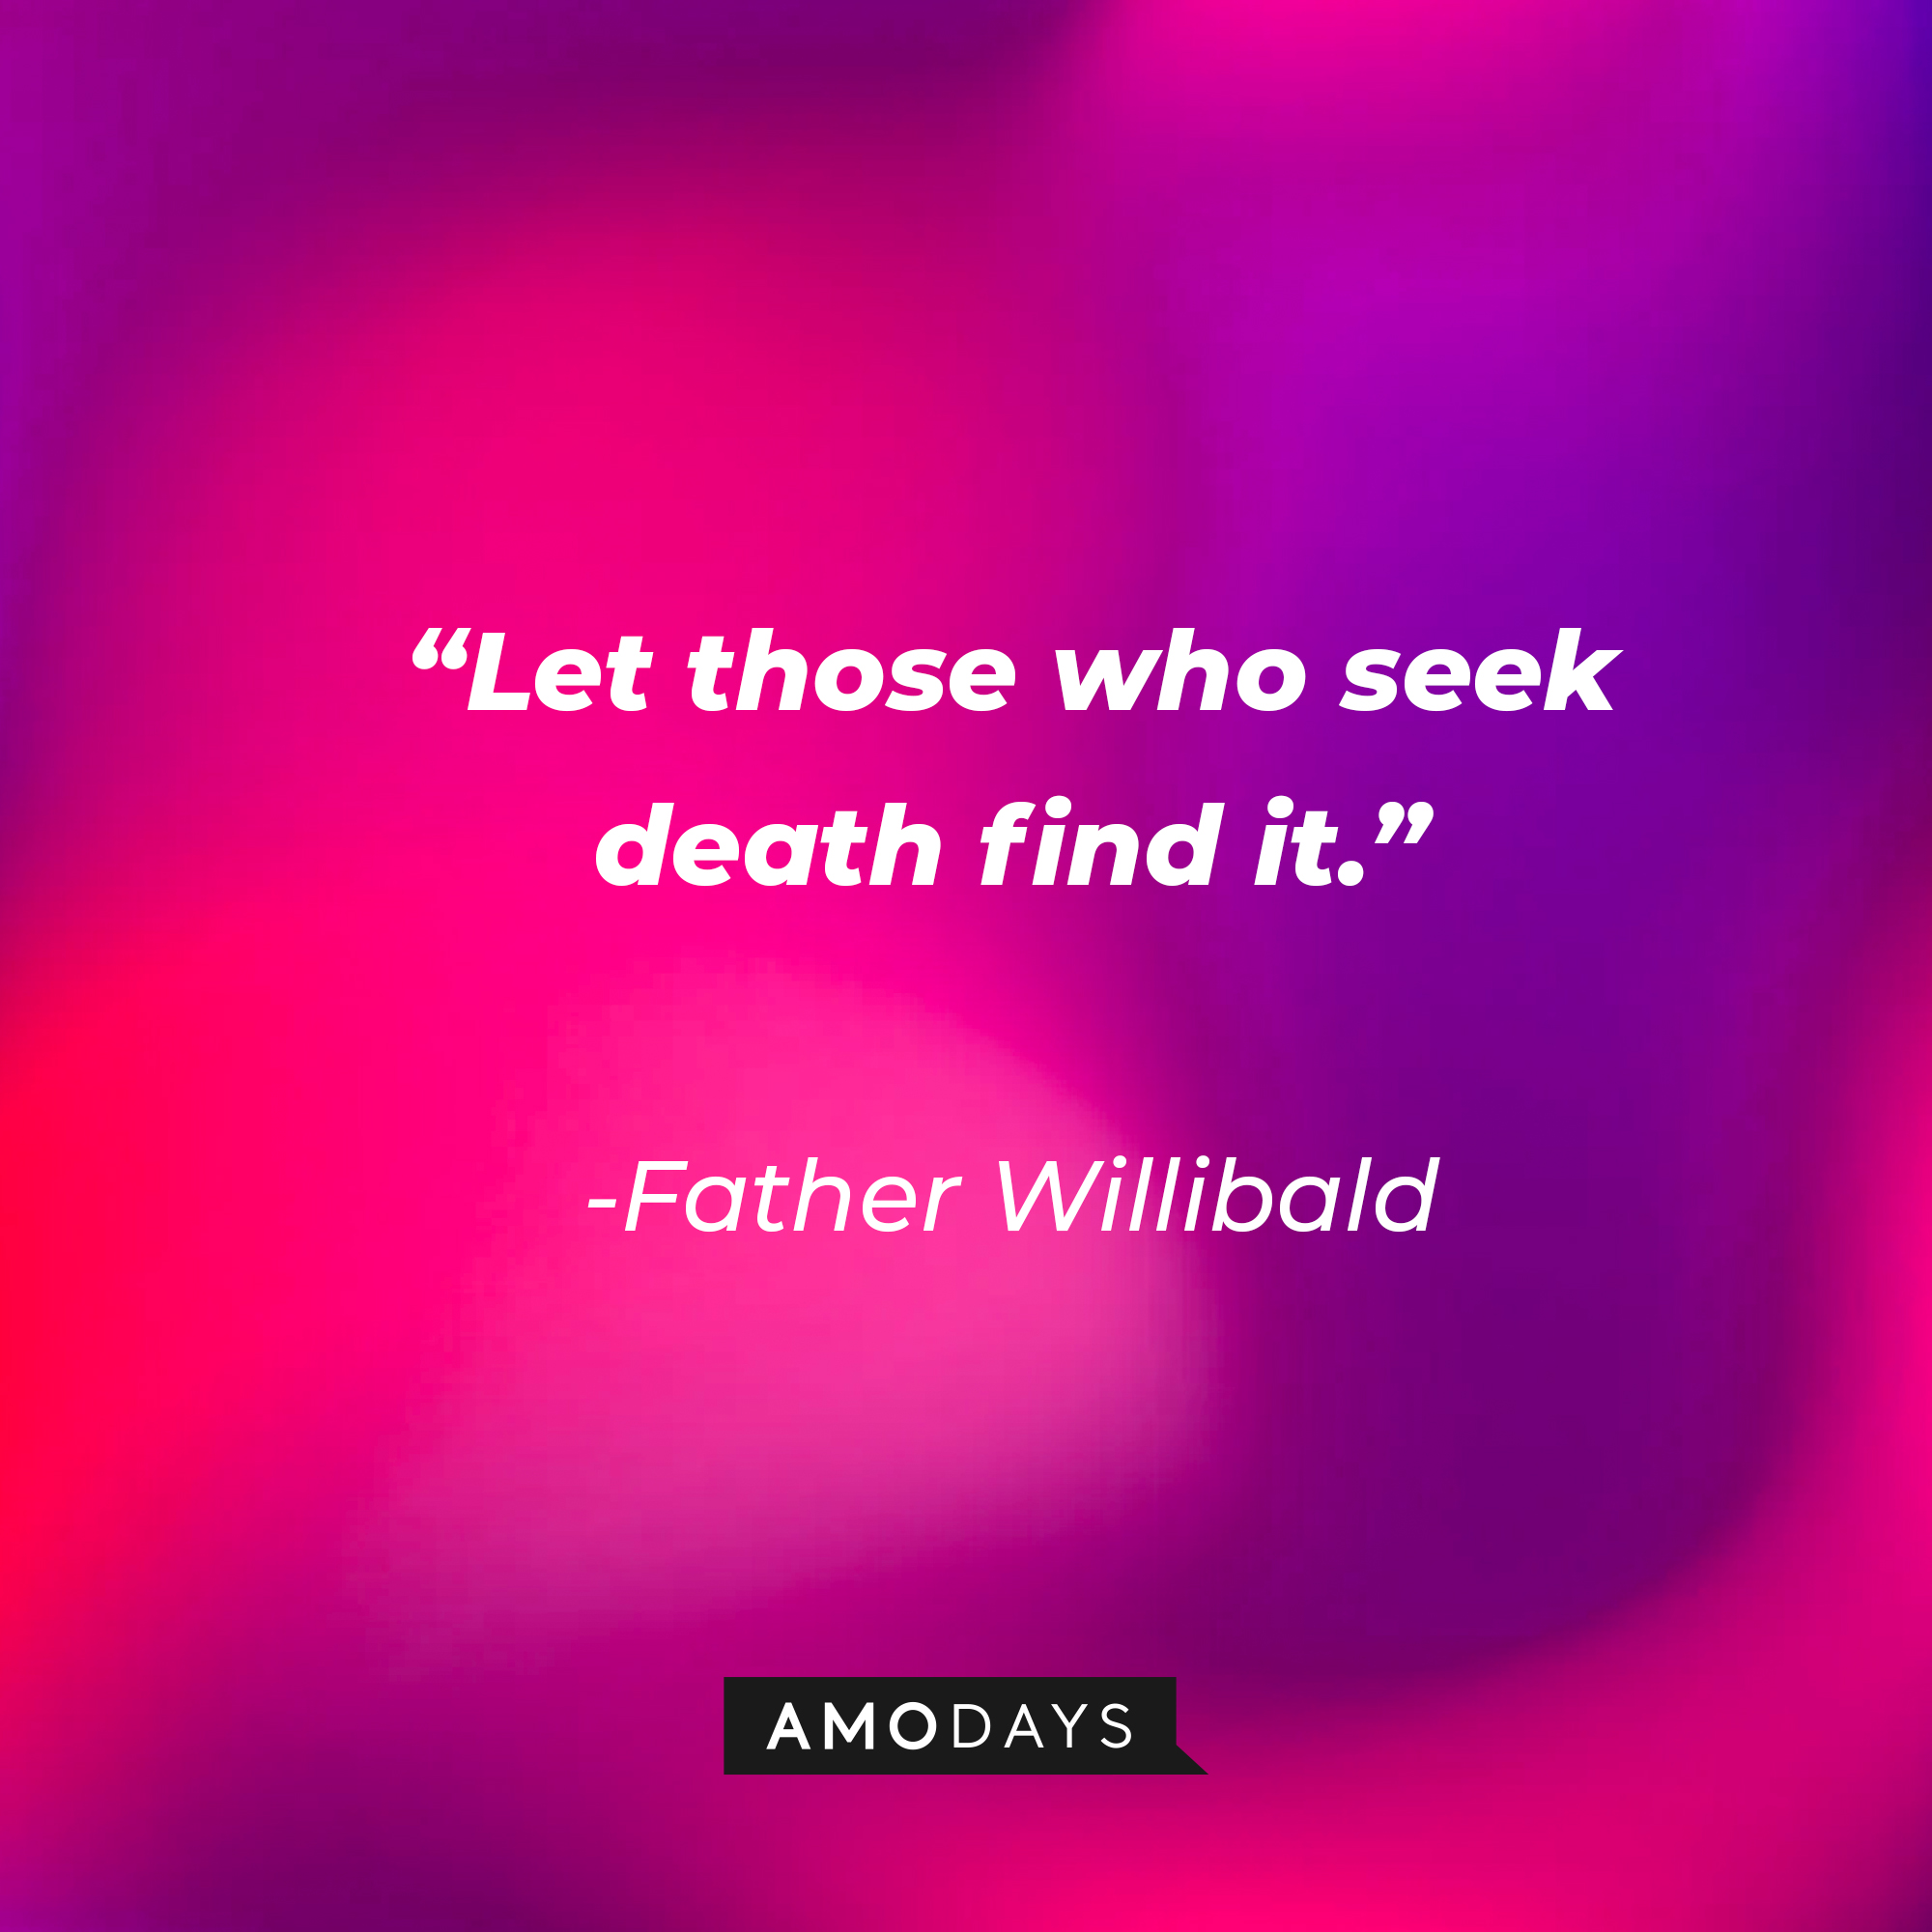 Father Willibald’s quote: “Let those who seek death find it.” | Source: Amodays